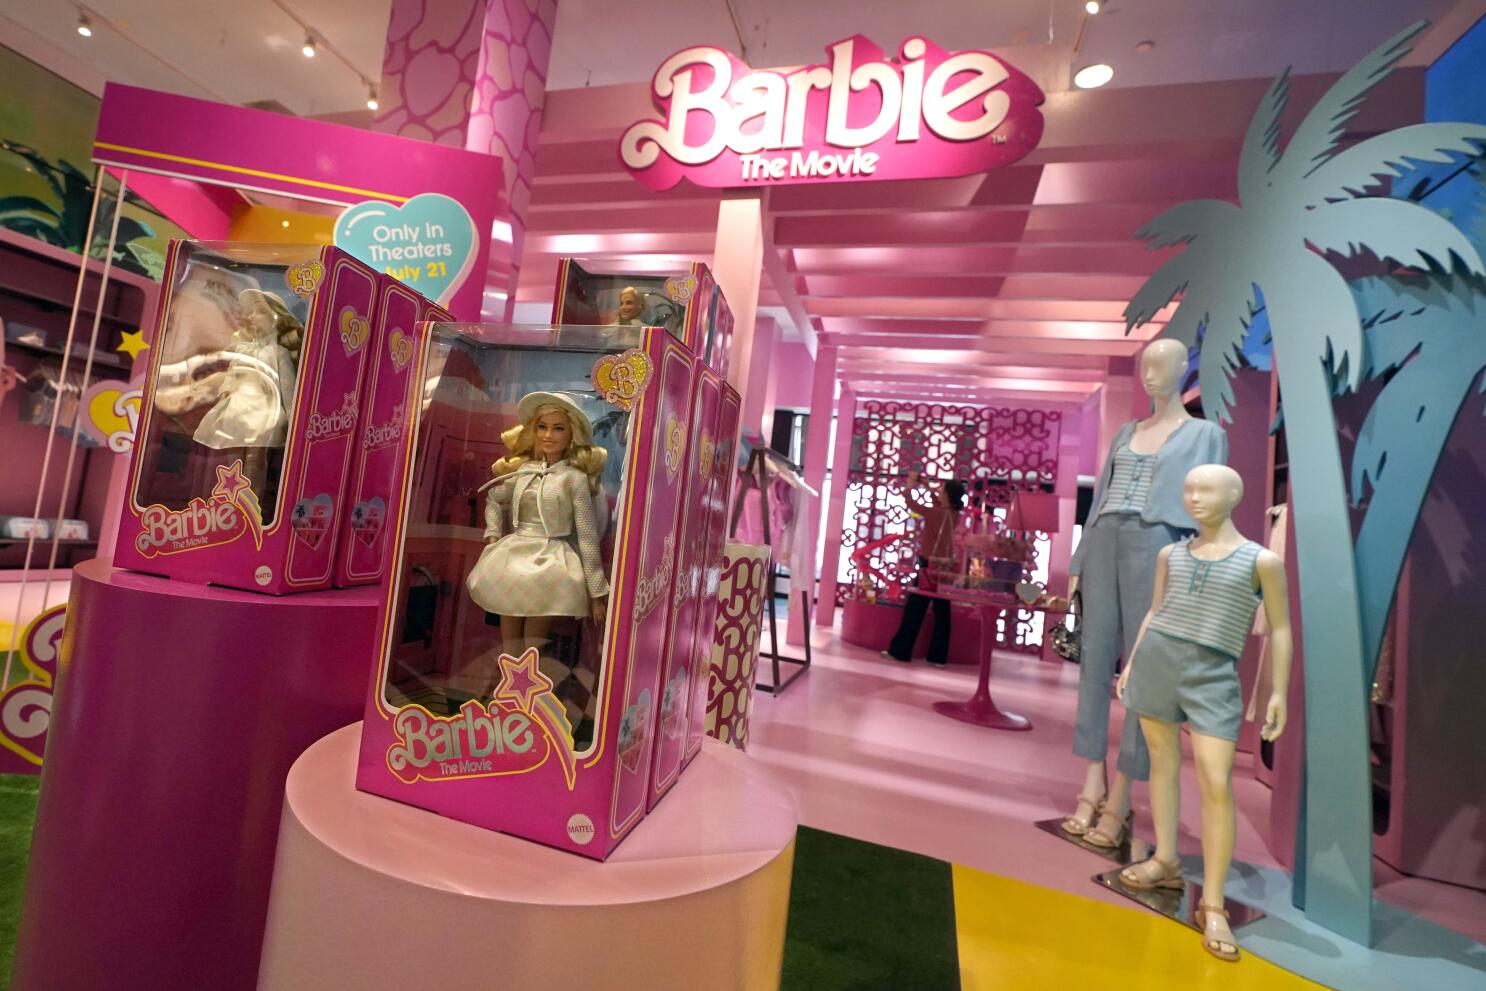 After 'Barbie' success, Mattel to make American Doll live-action